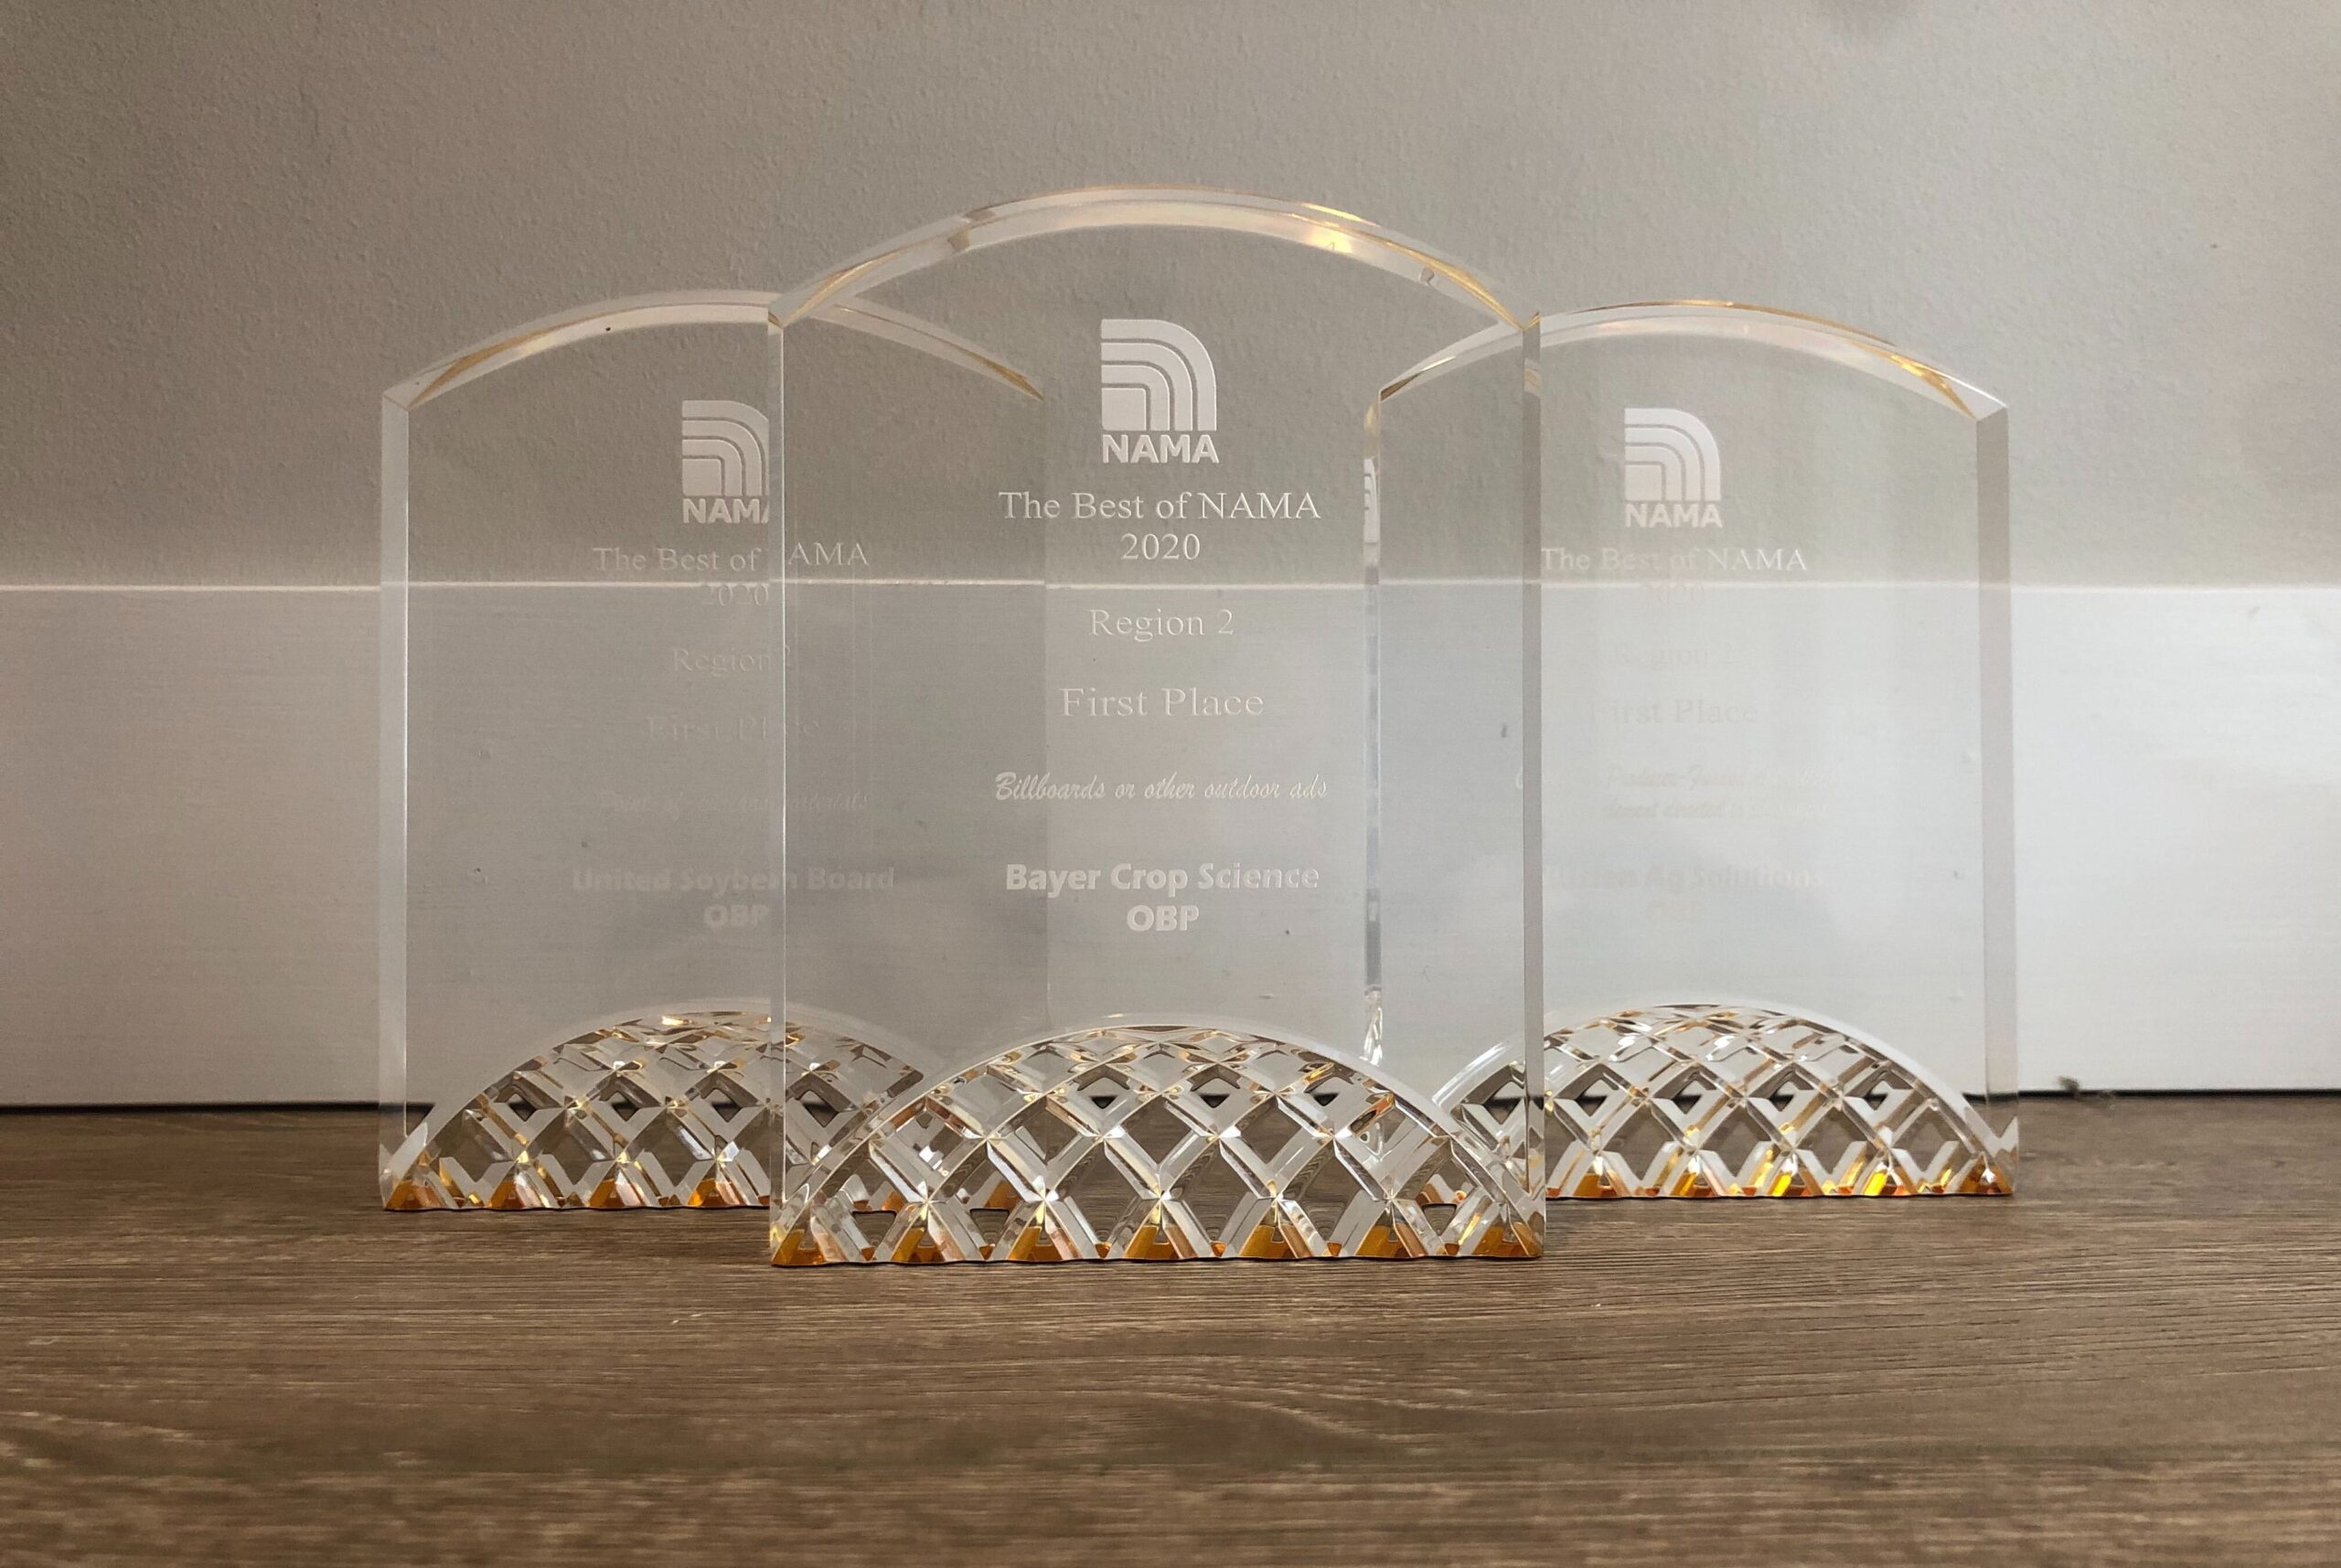 Three awards for The Best of NAMA 2020 sit on a wooden table. All three awards have been presented to OBP.